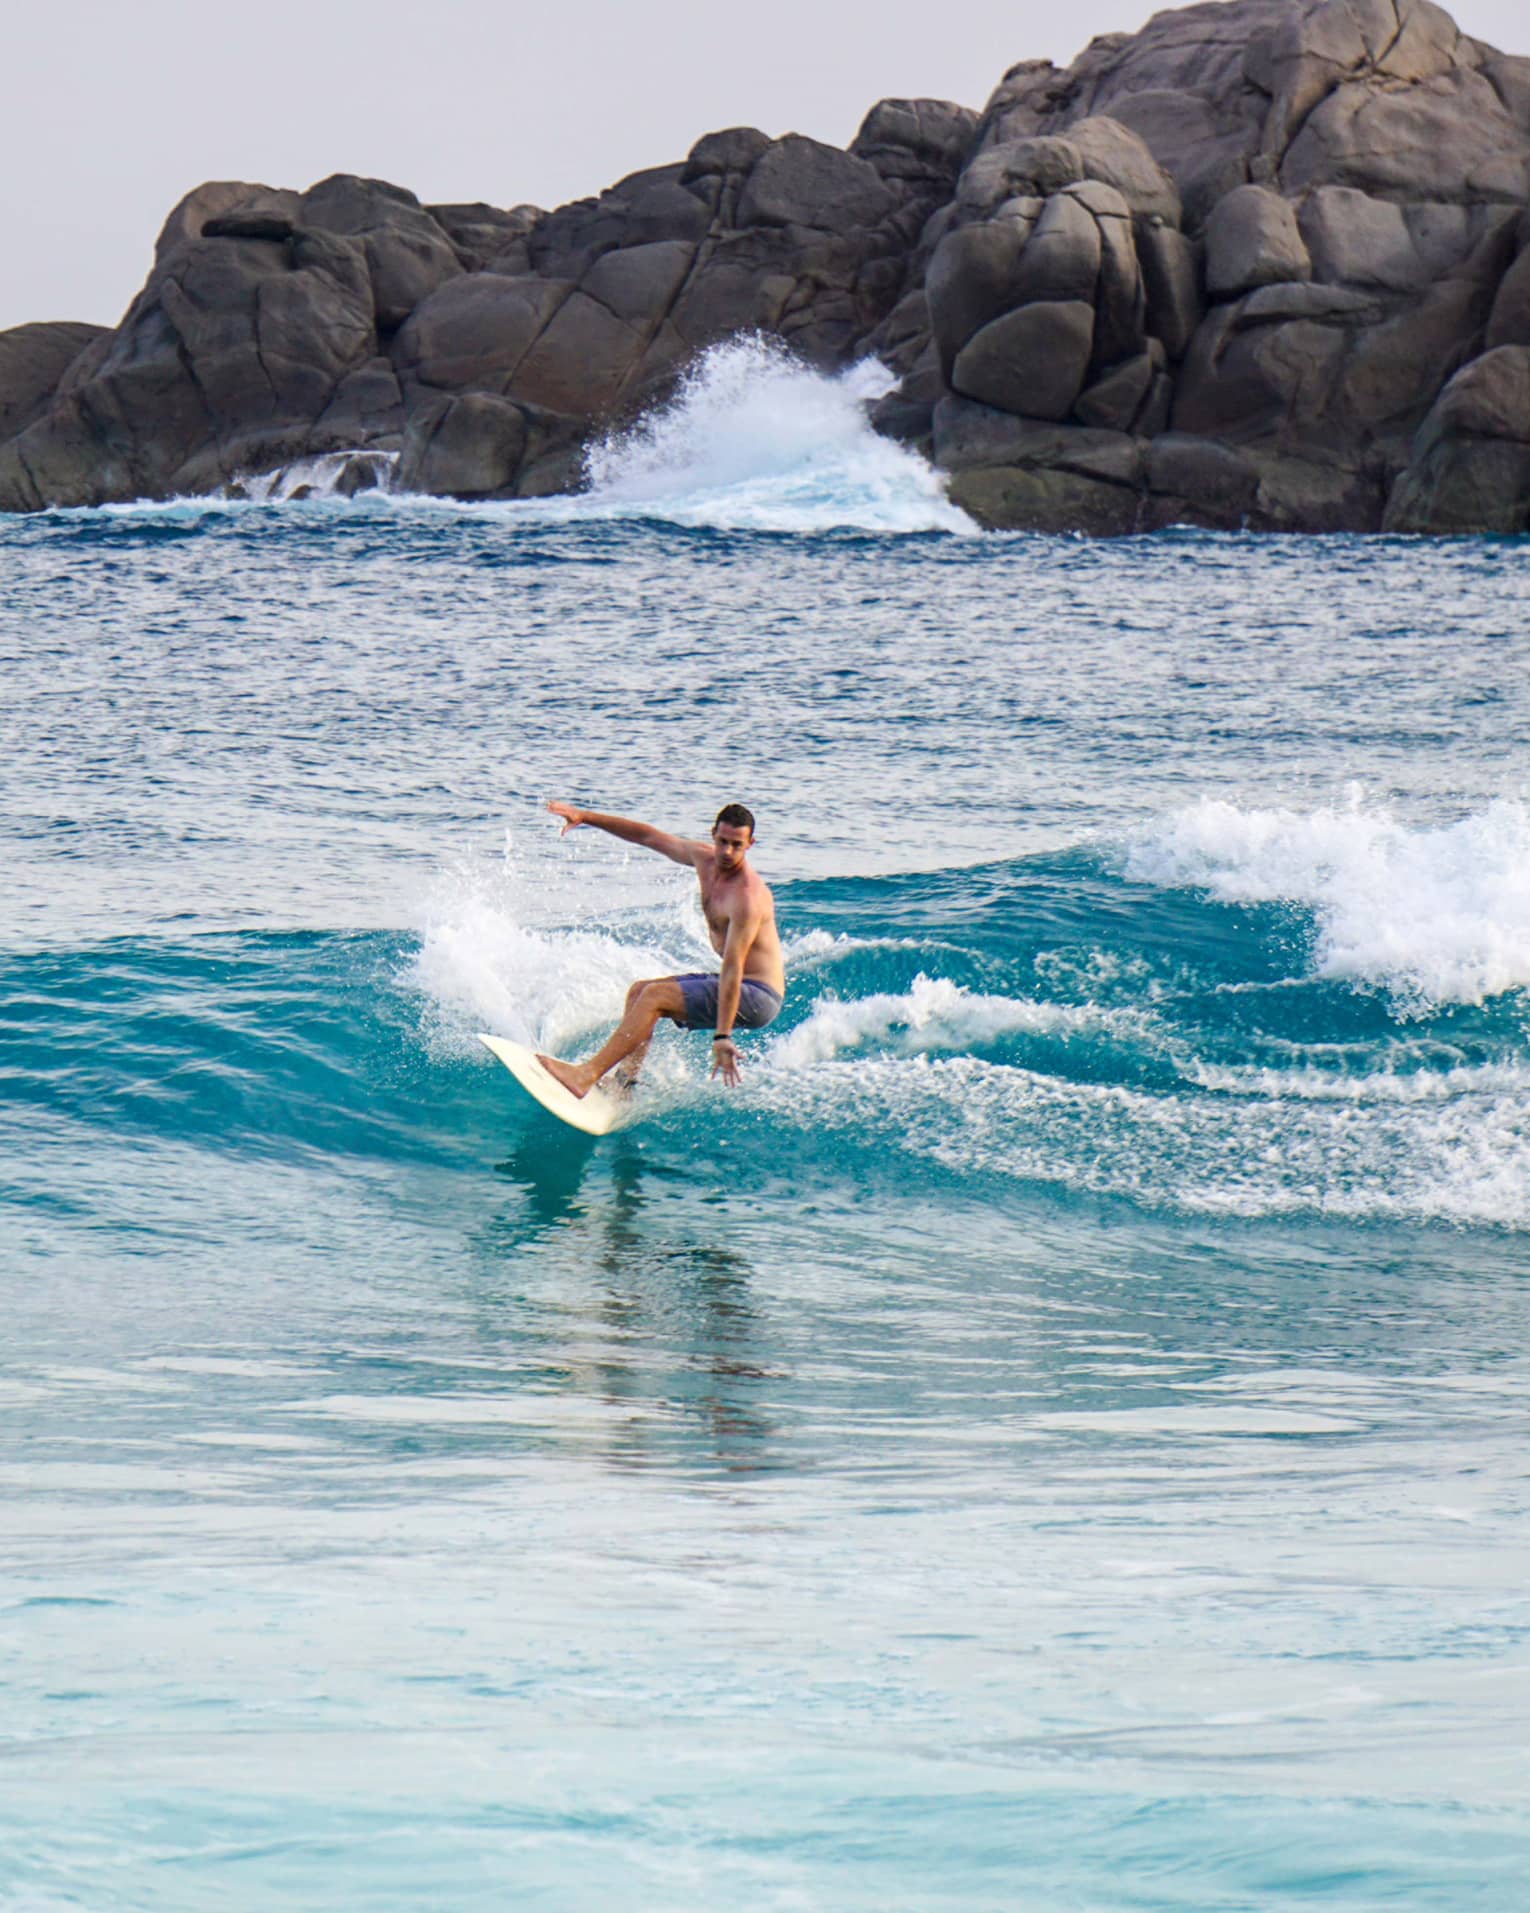 Man on surfboard rides on small blue wave, large rocks in background